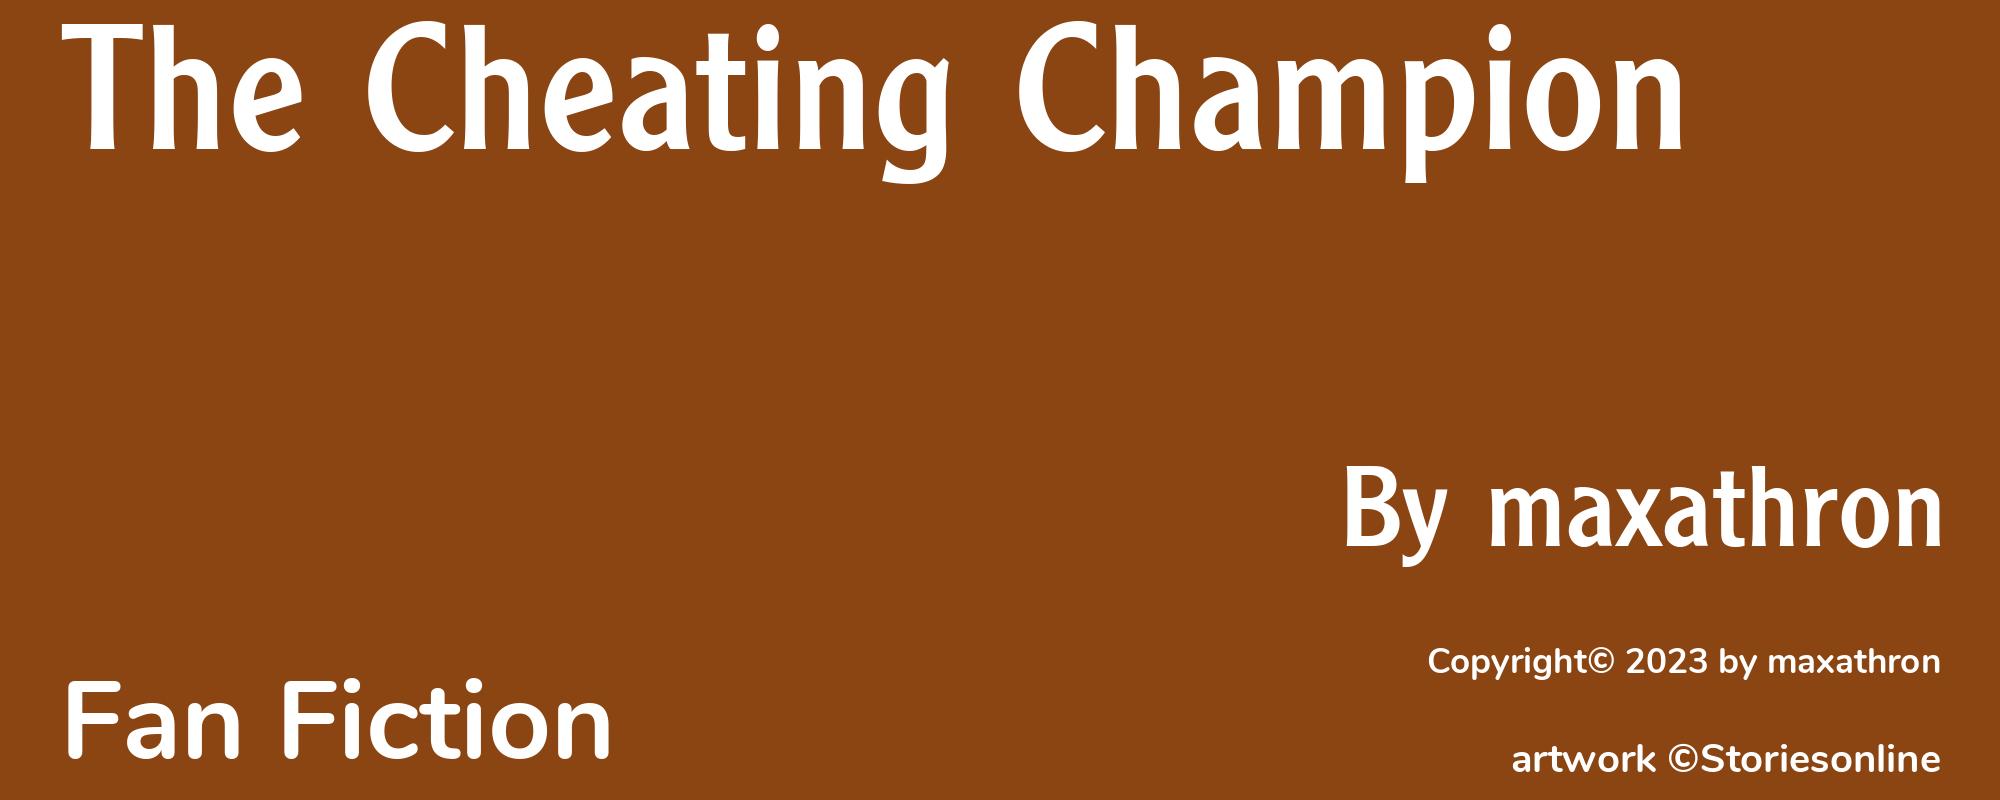 The Cheating Champion - Cover